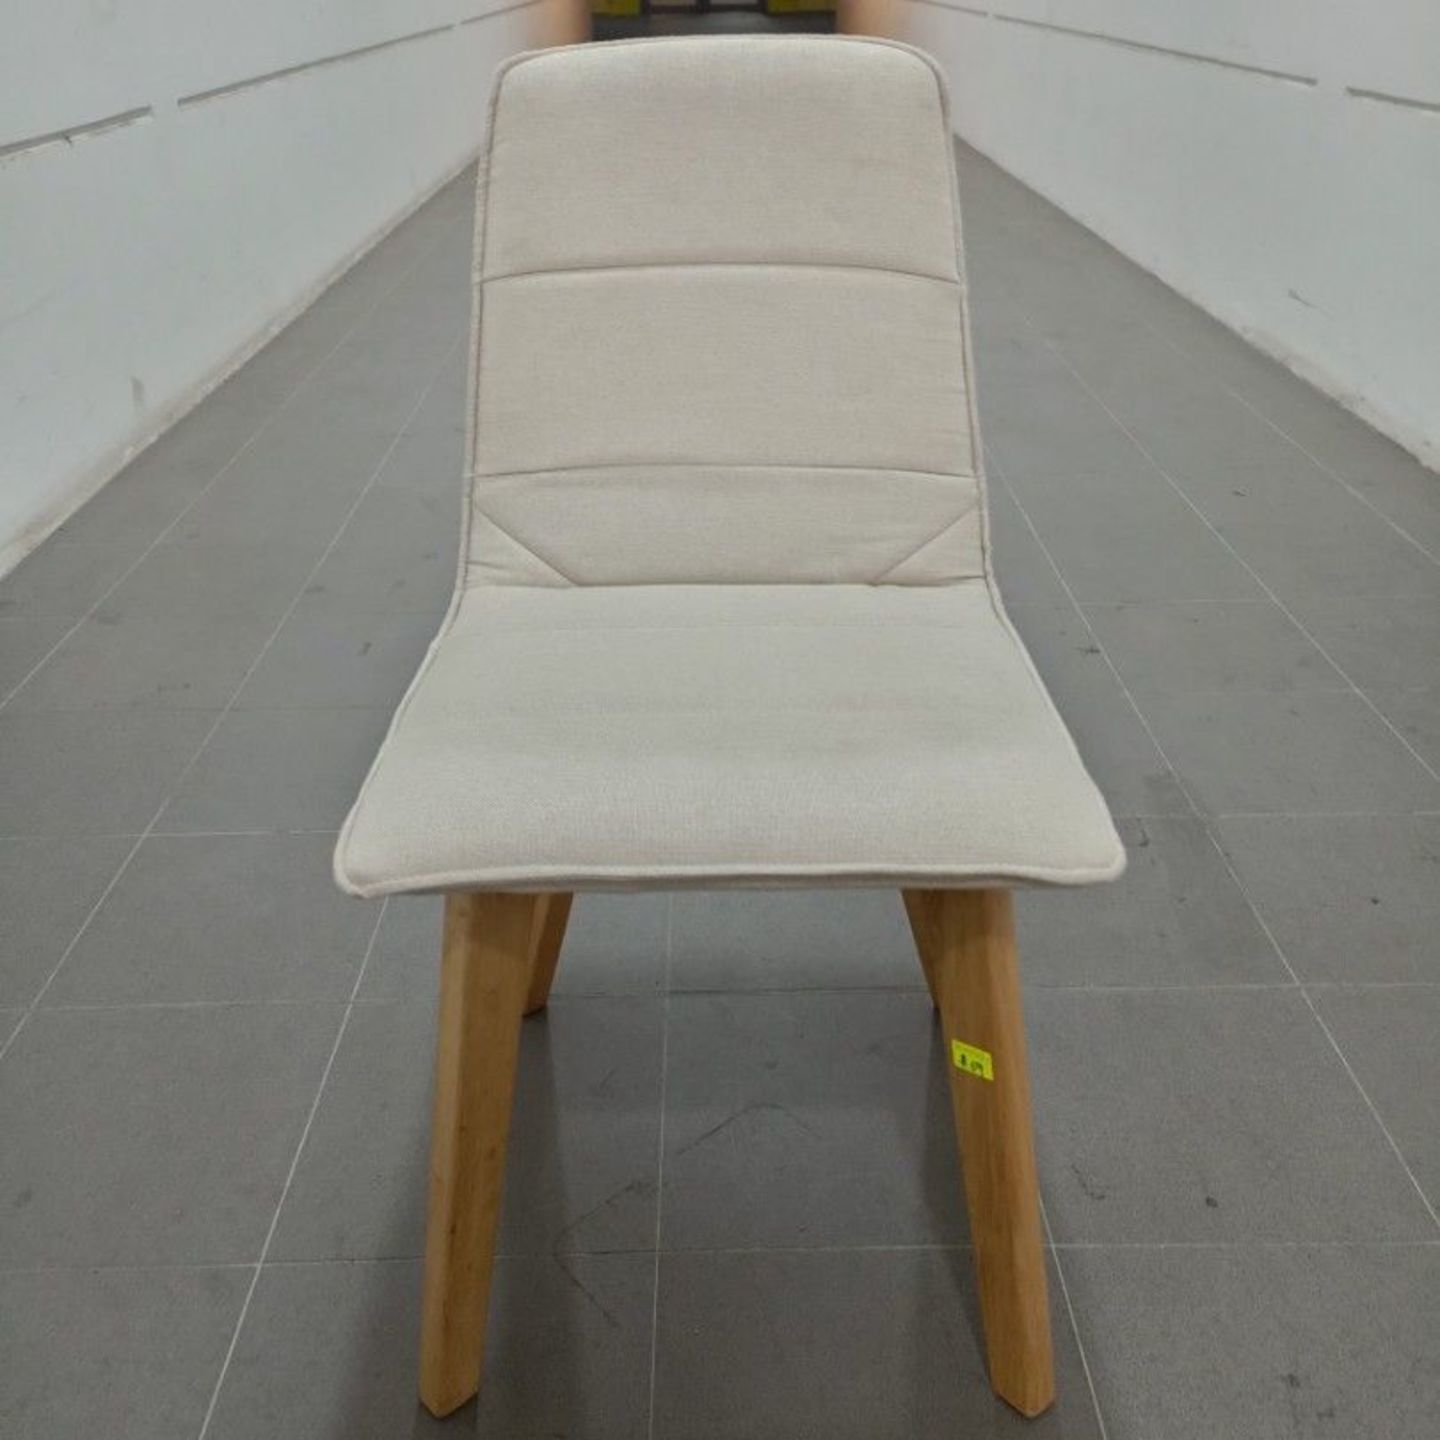 FIRE SALE - RAJAN Dining Chair in OAK with Light Cream Cushion (only piece)